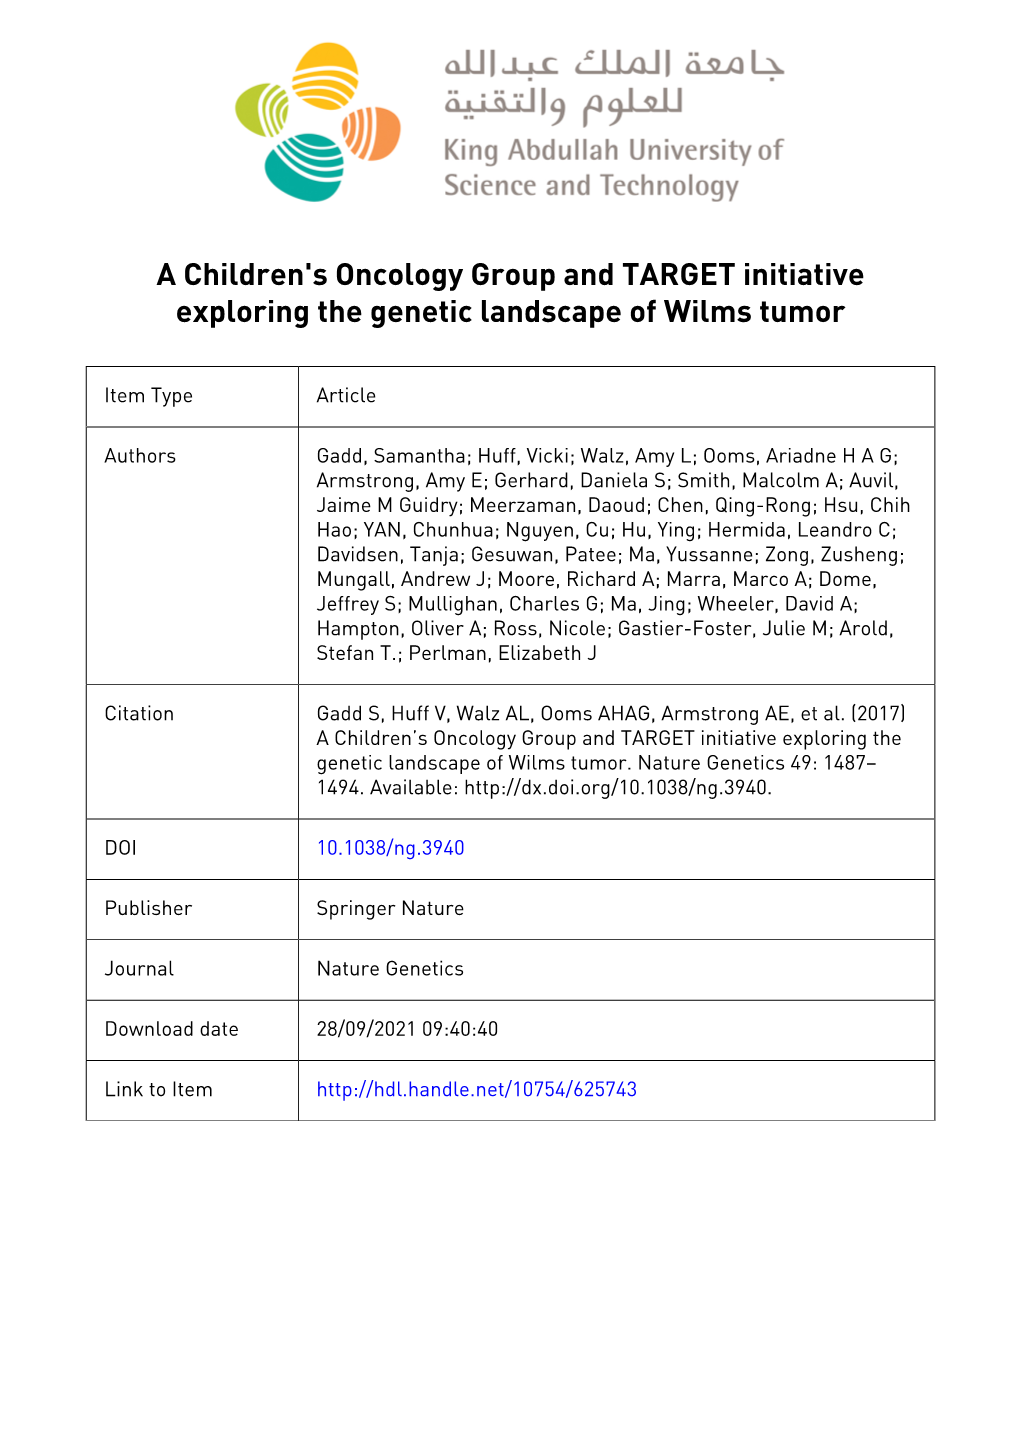 A Children's Oncology Group and TARGET Initiative Exploring the Genetic Landscape of Wilms Tumor